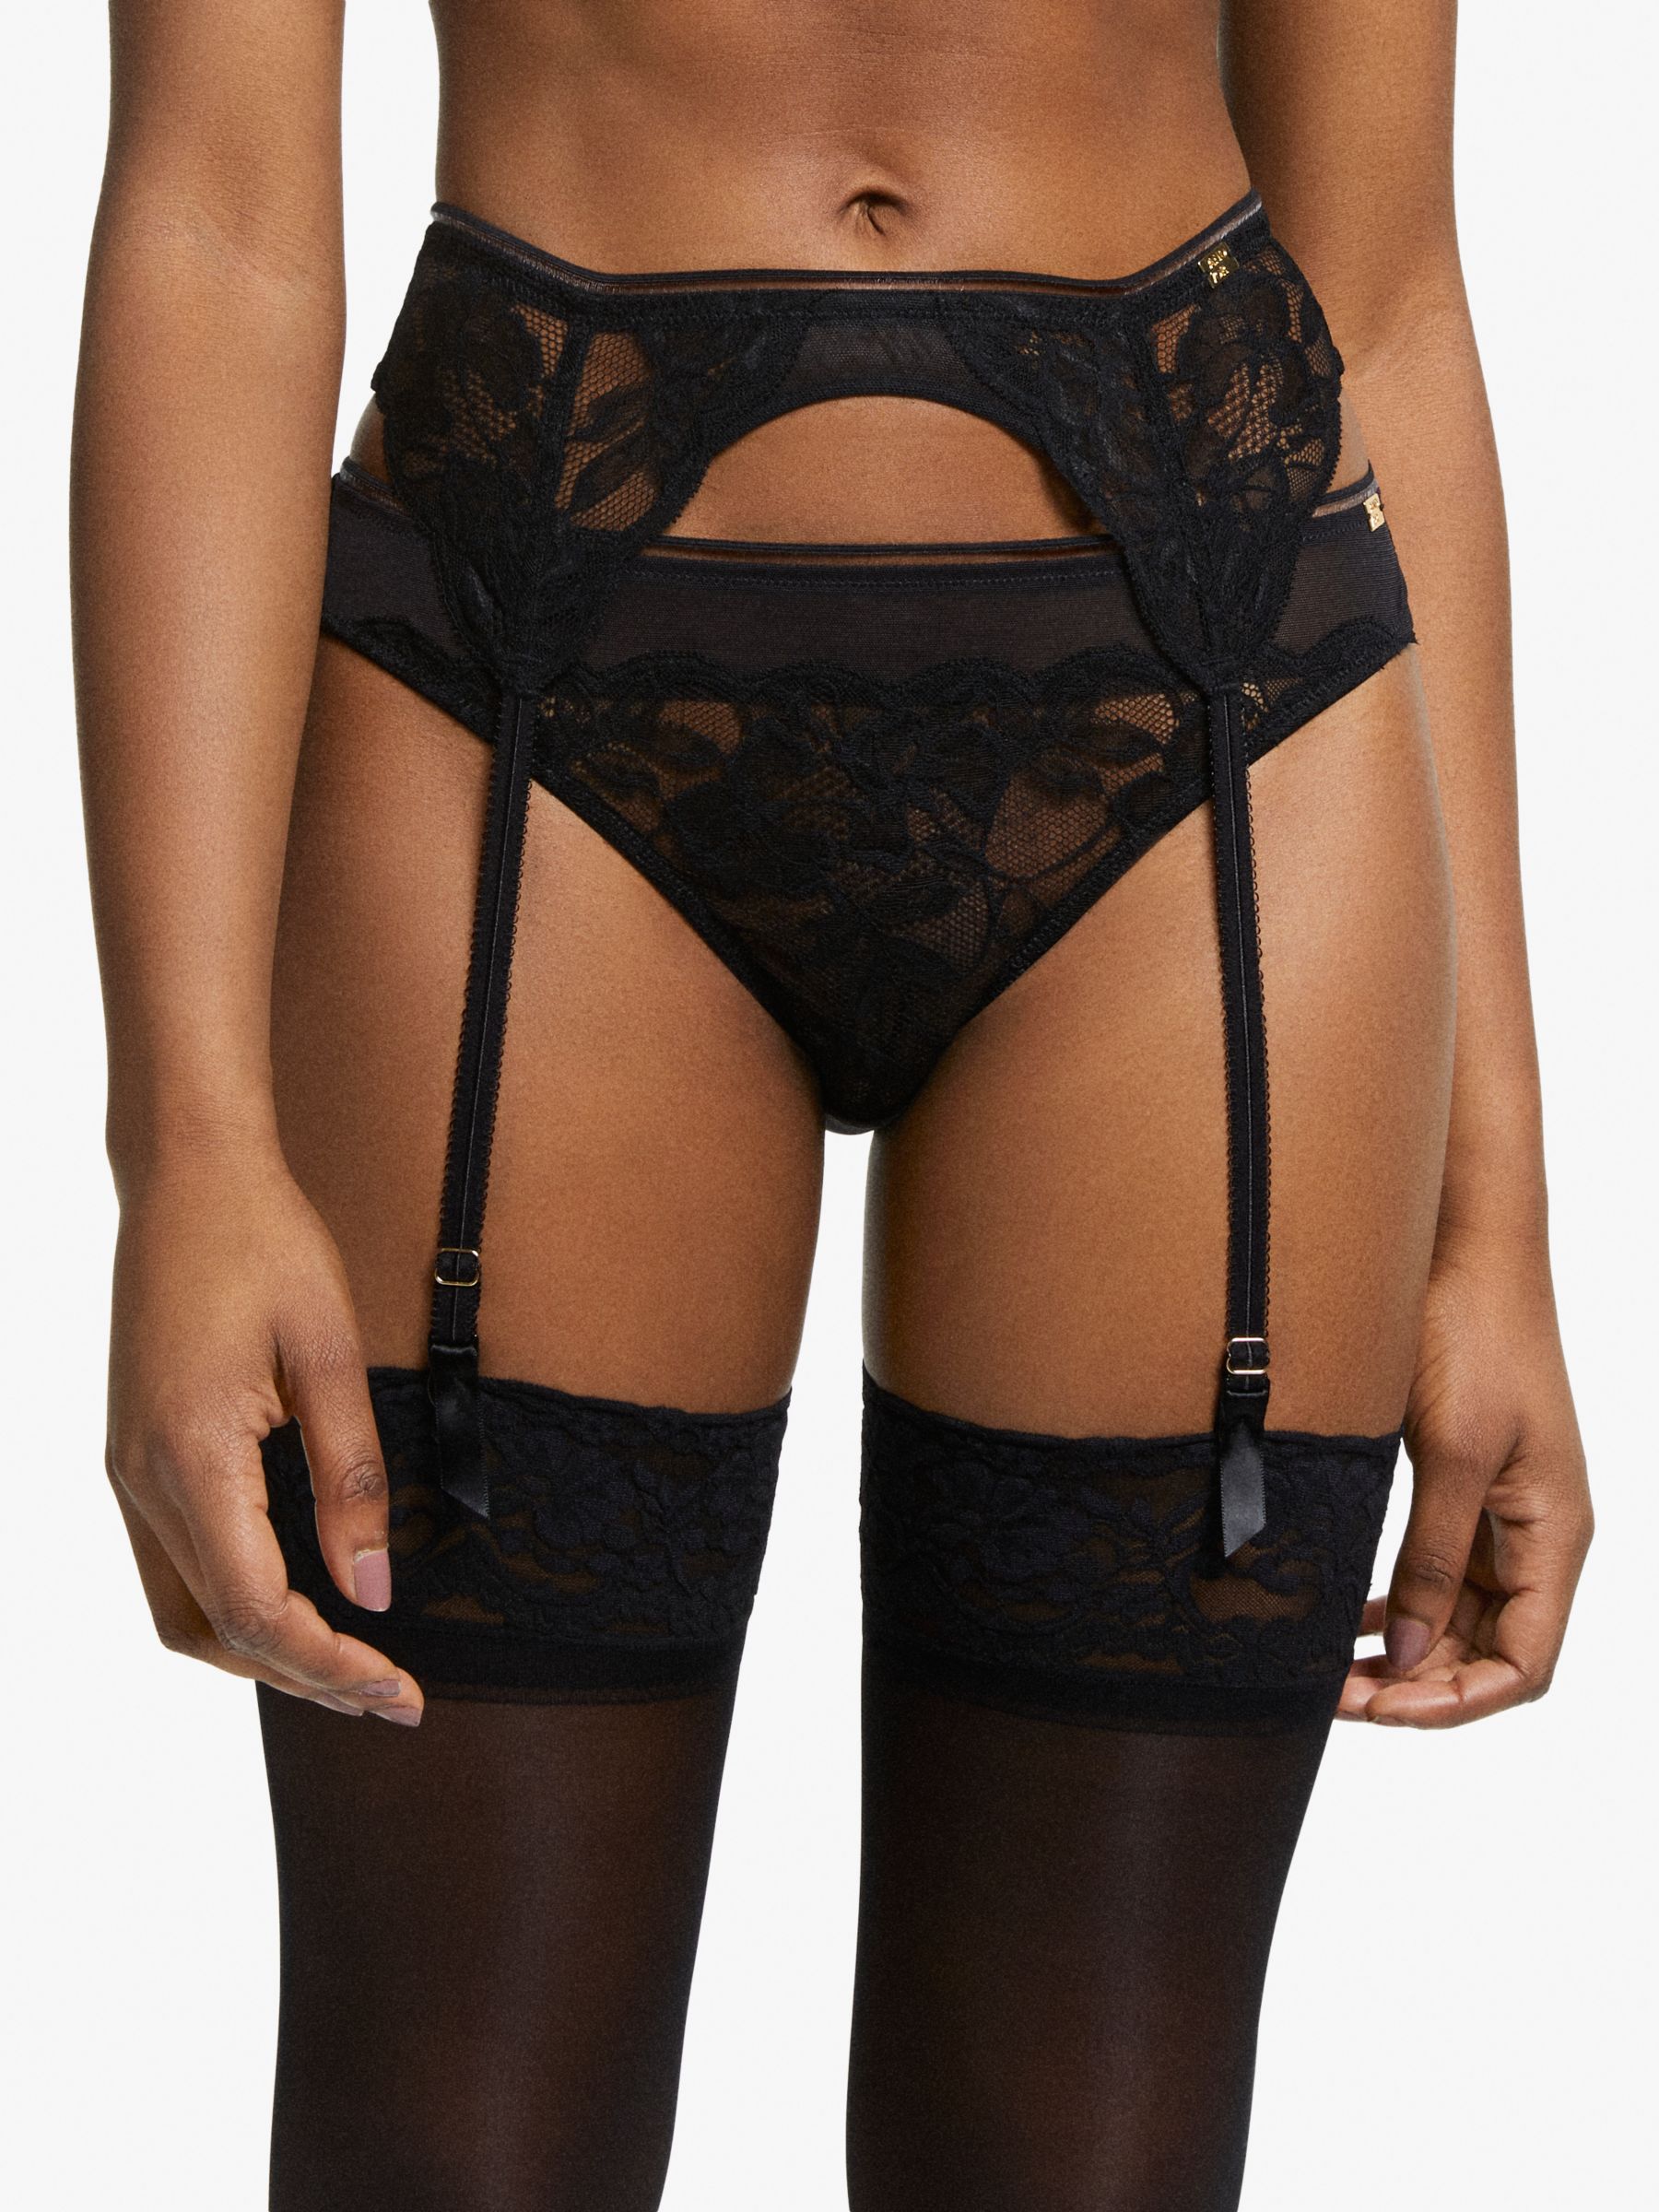 AND/OR Wren Lace Suspender, Black at John Lewis u0026 Partners